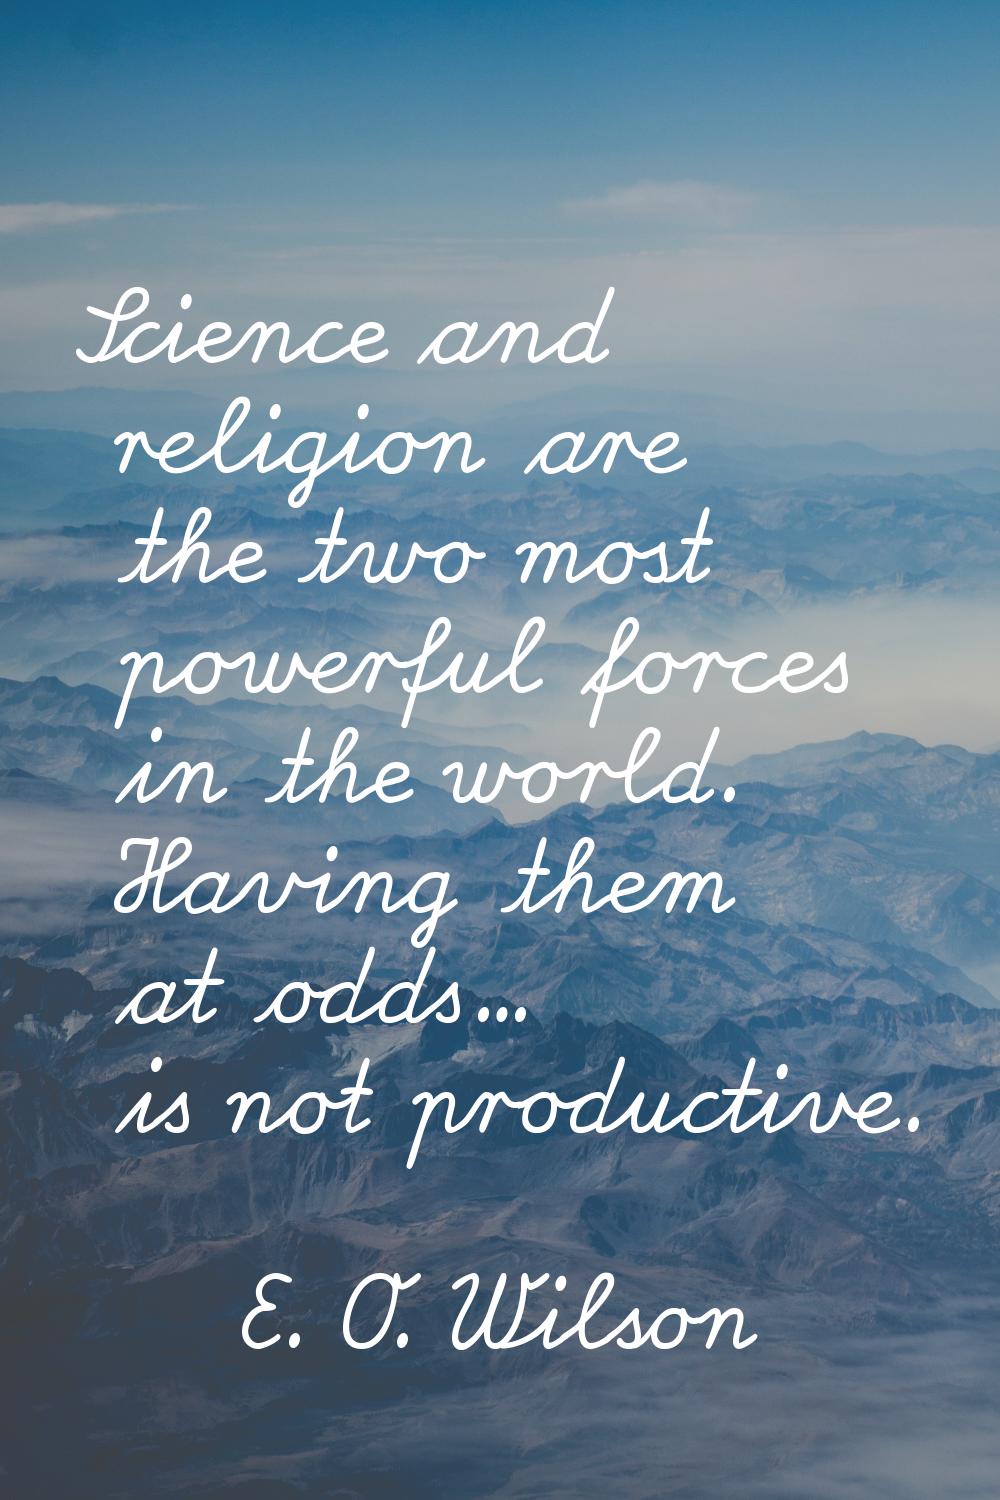 Science and religion are the two most powerful forces in the world. Having them at odds... is not p